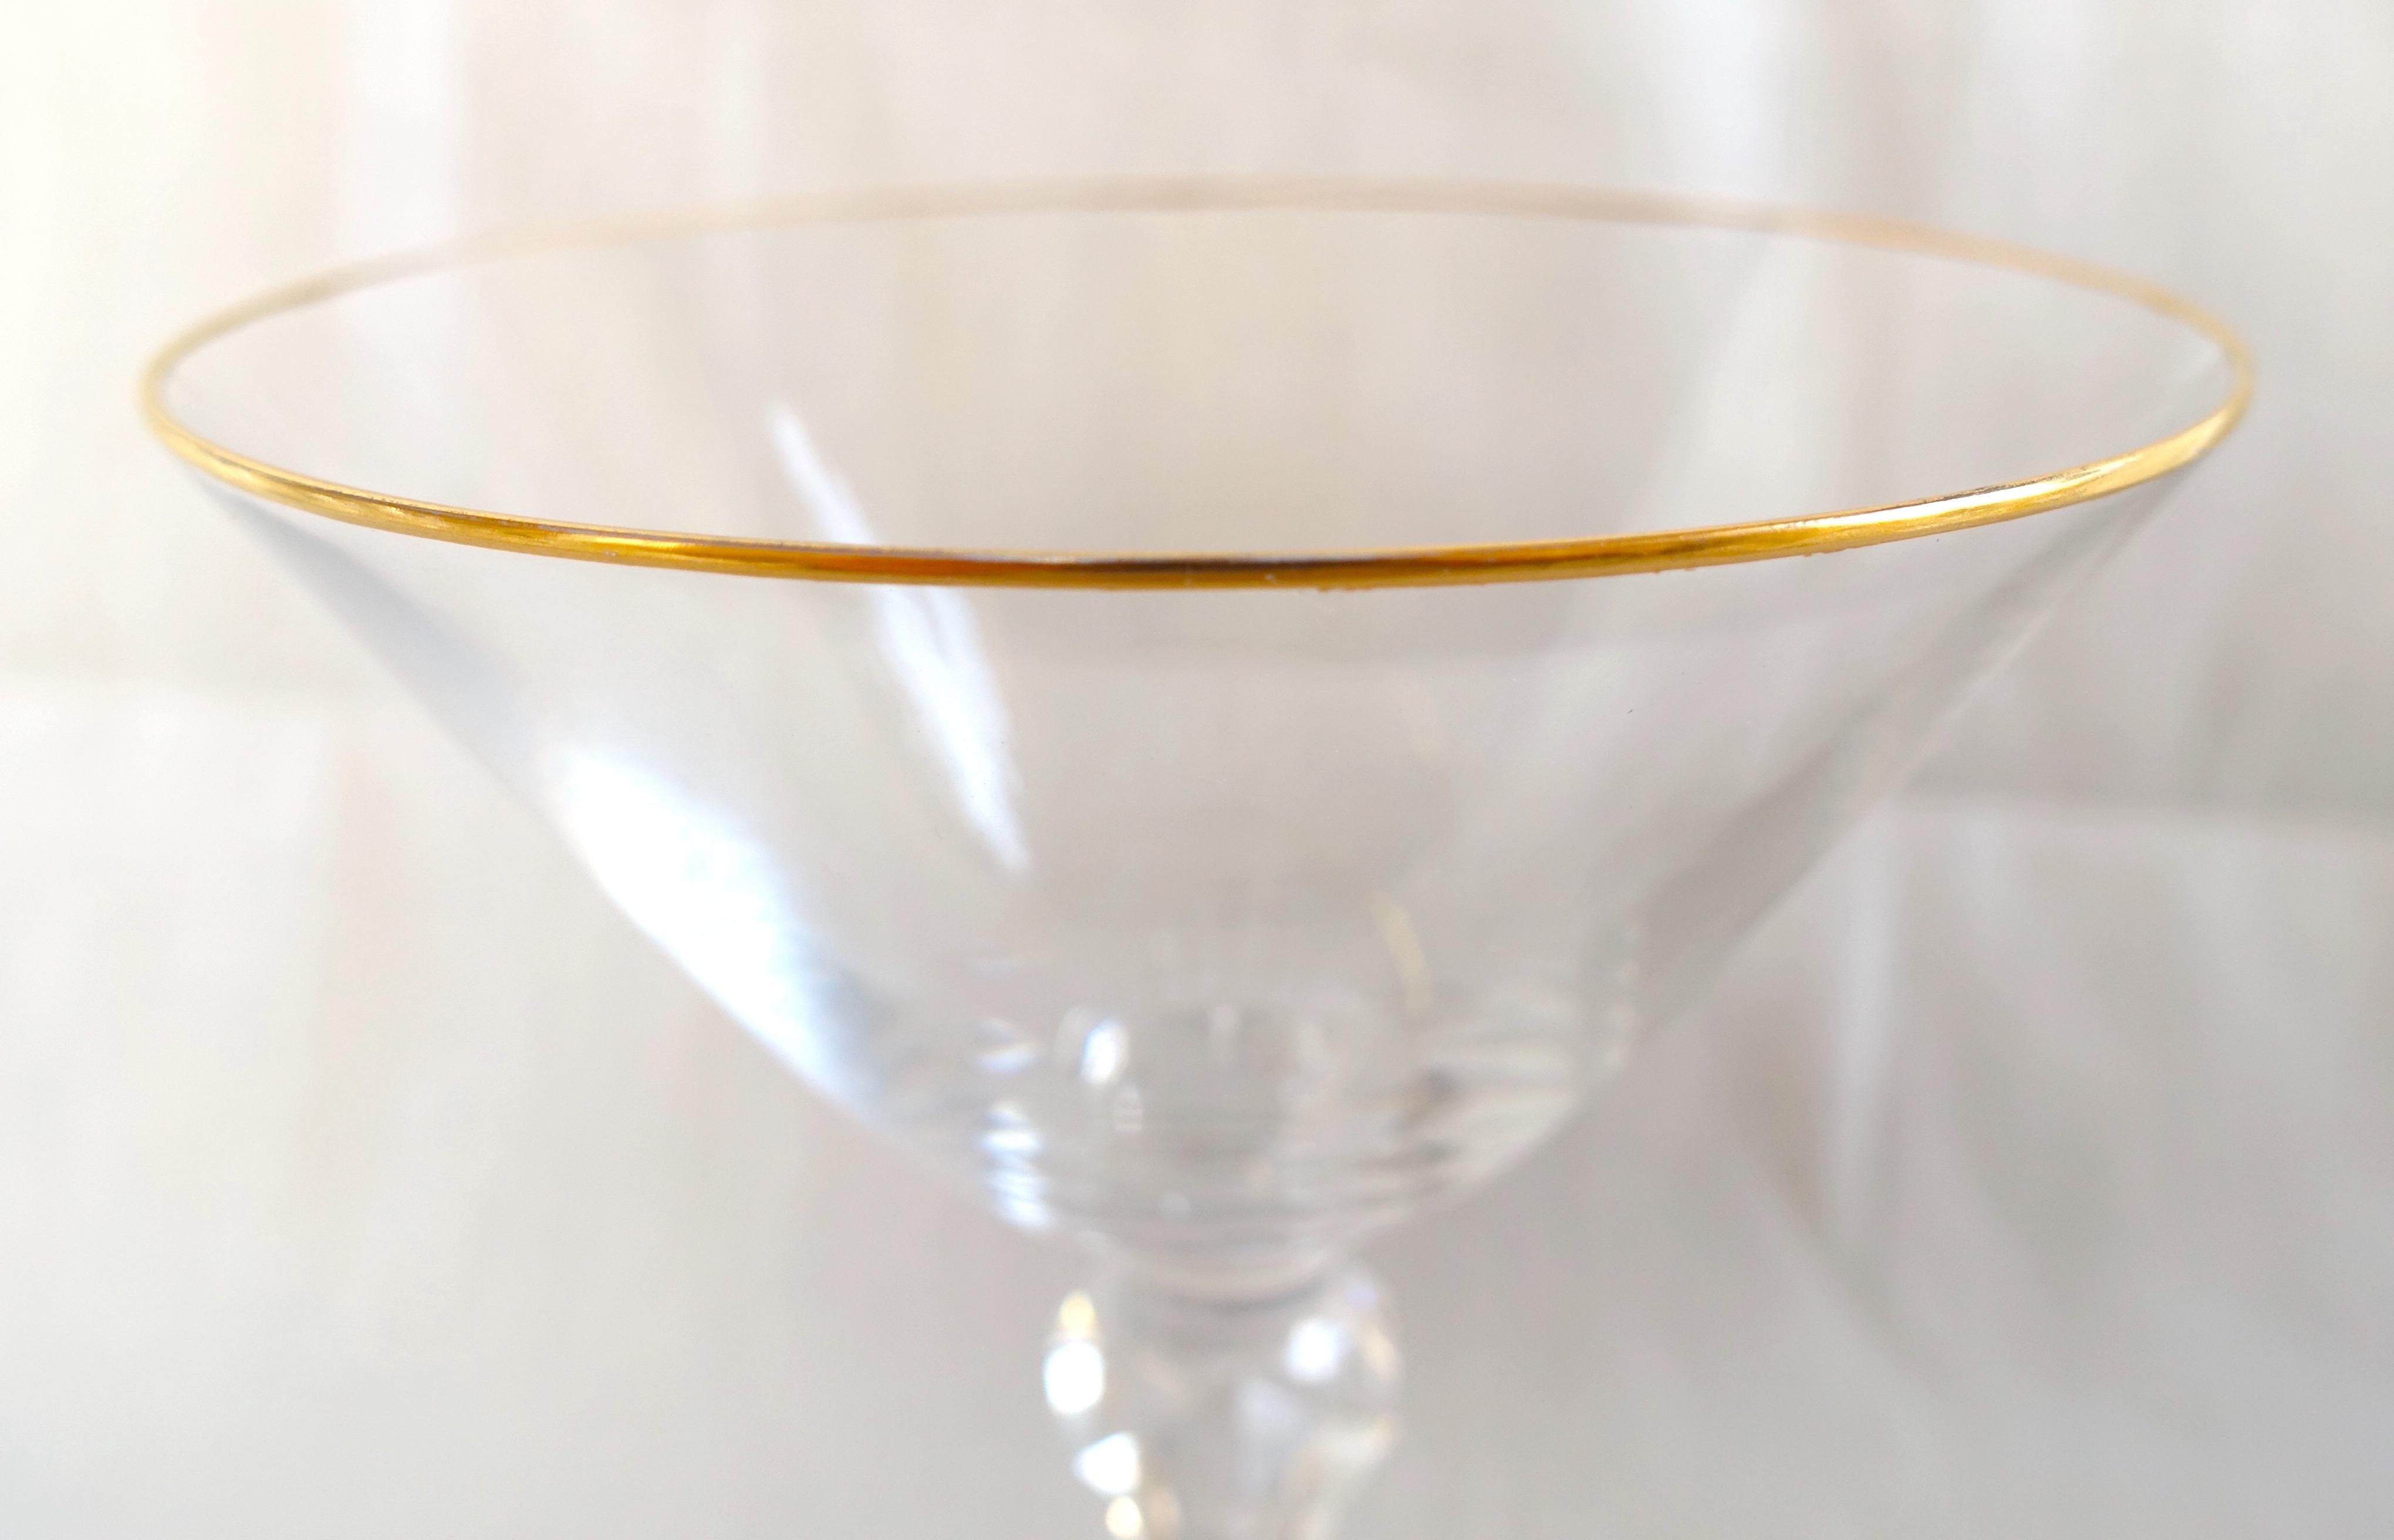 Gilt Baccarat crystal champagne glass - fine gold gilt - early 20th century